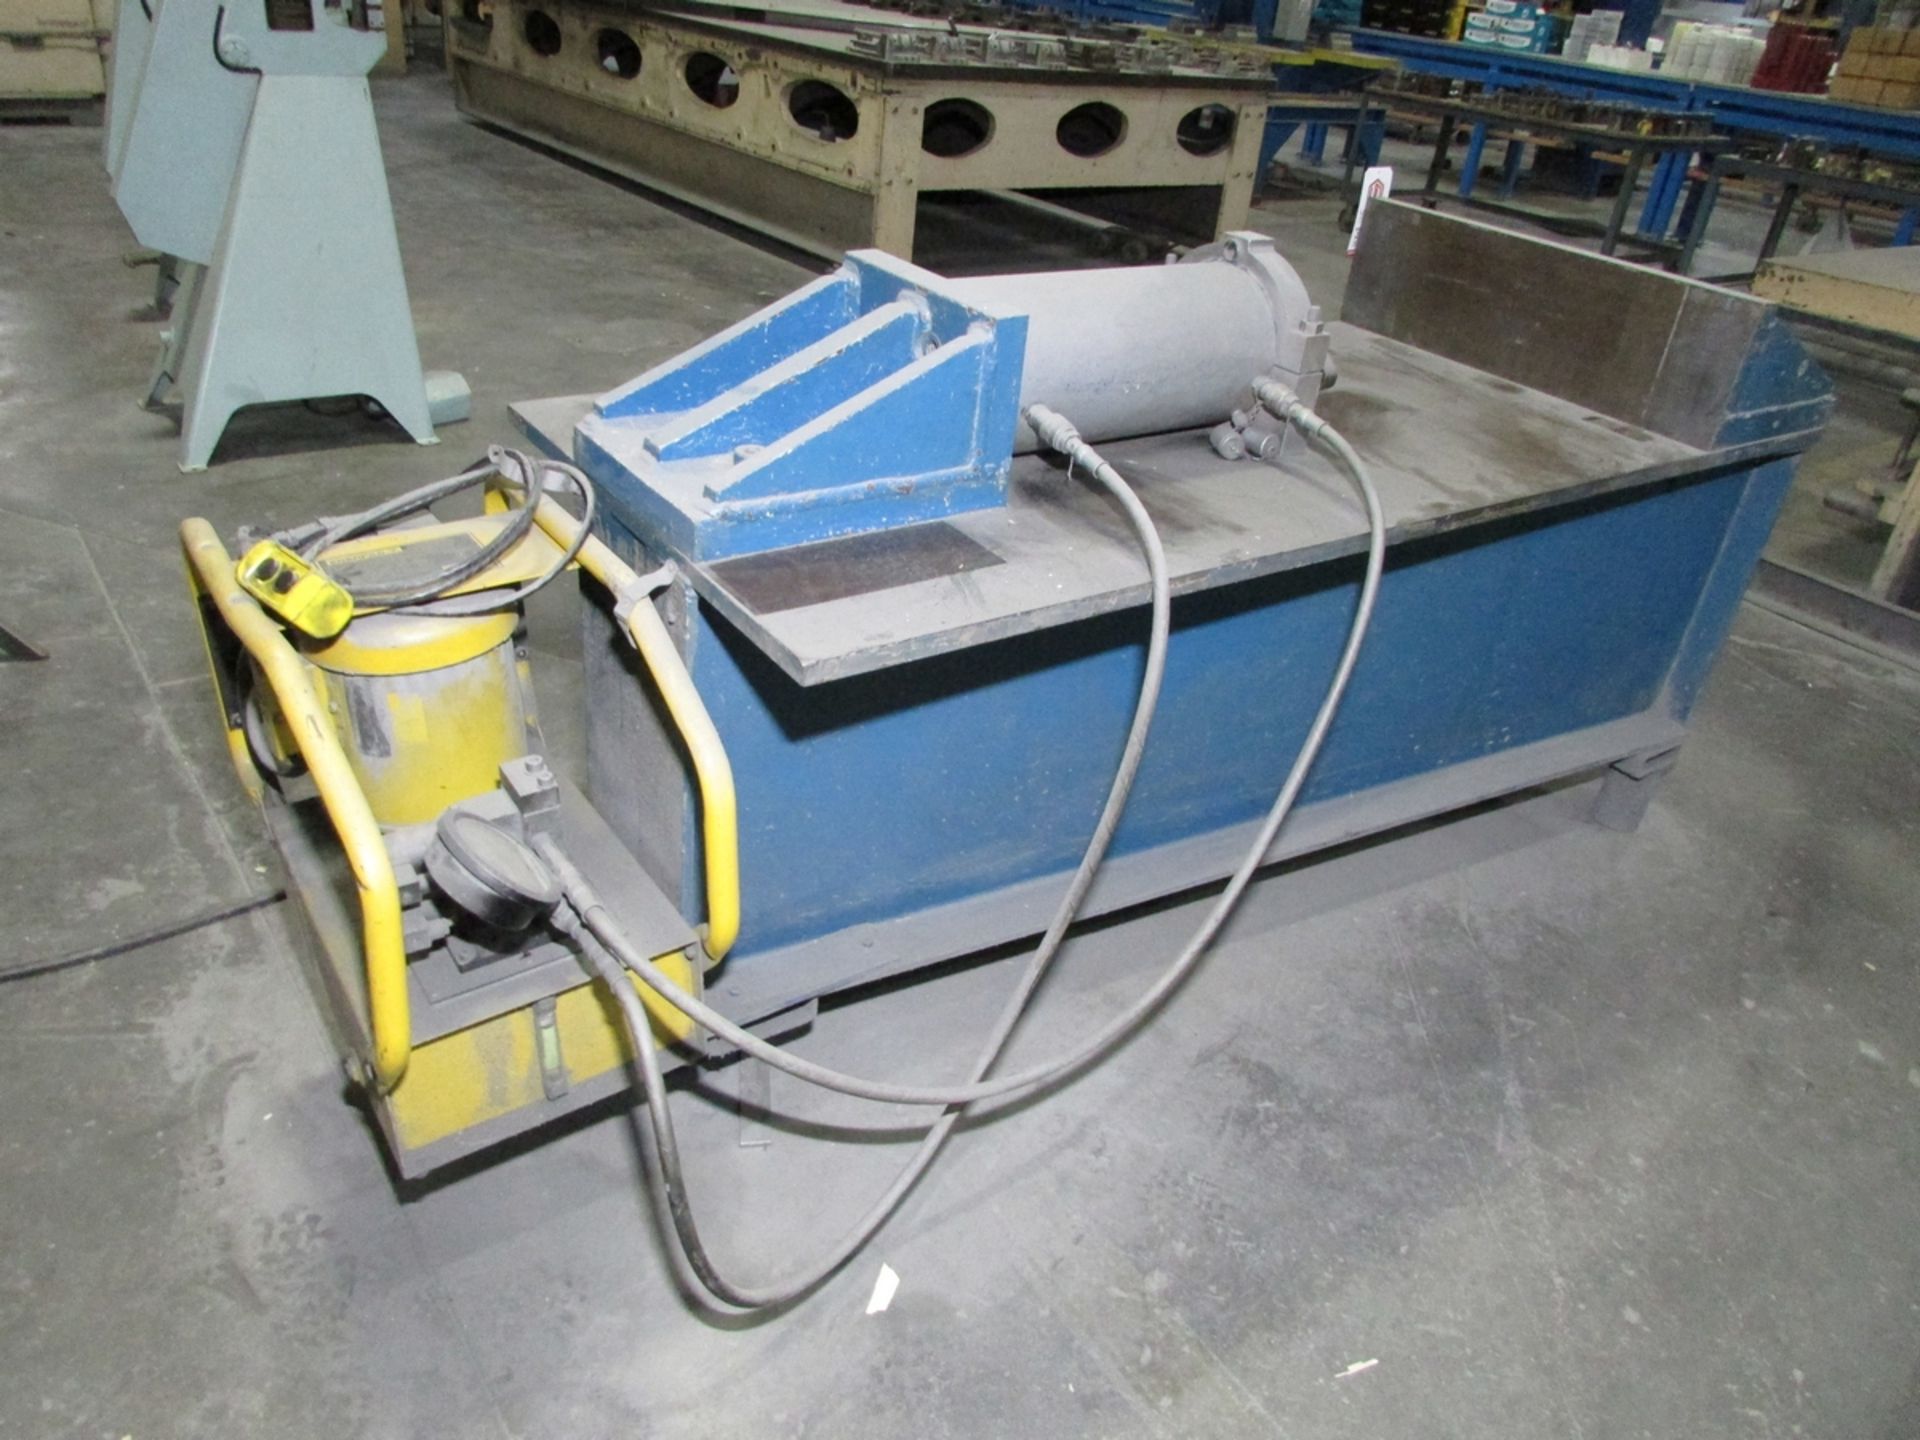 HORIZONTAL HYDRAULIC STRAIGHTENING PRESS, 30" X 9" ANGLE PLATE, 80" X 30" TABLE, ENERPAC GPER5320J - Image 9 of 12